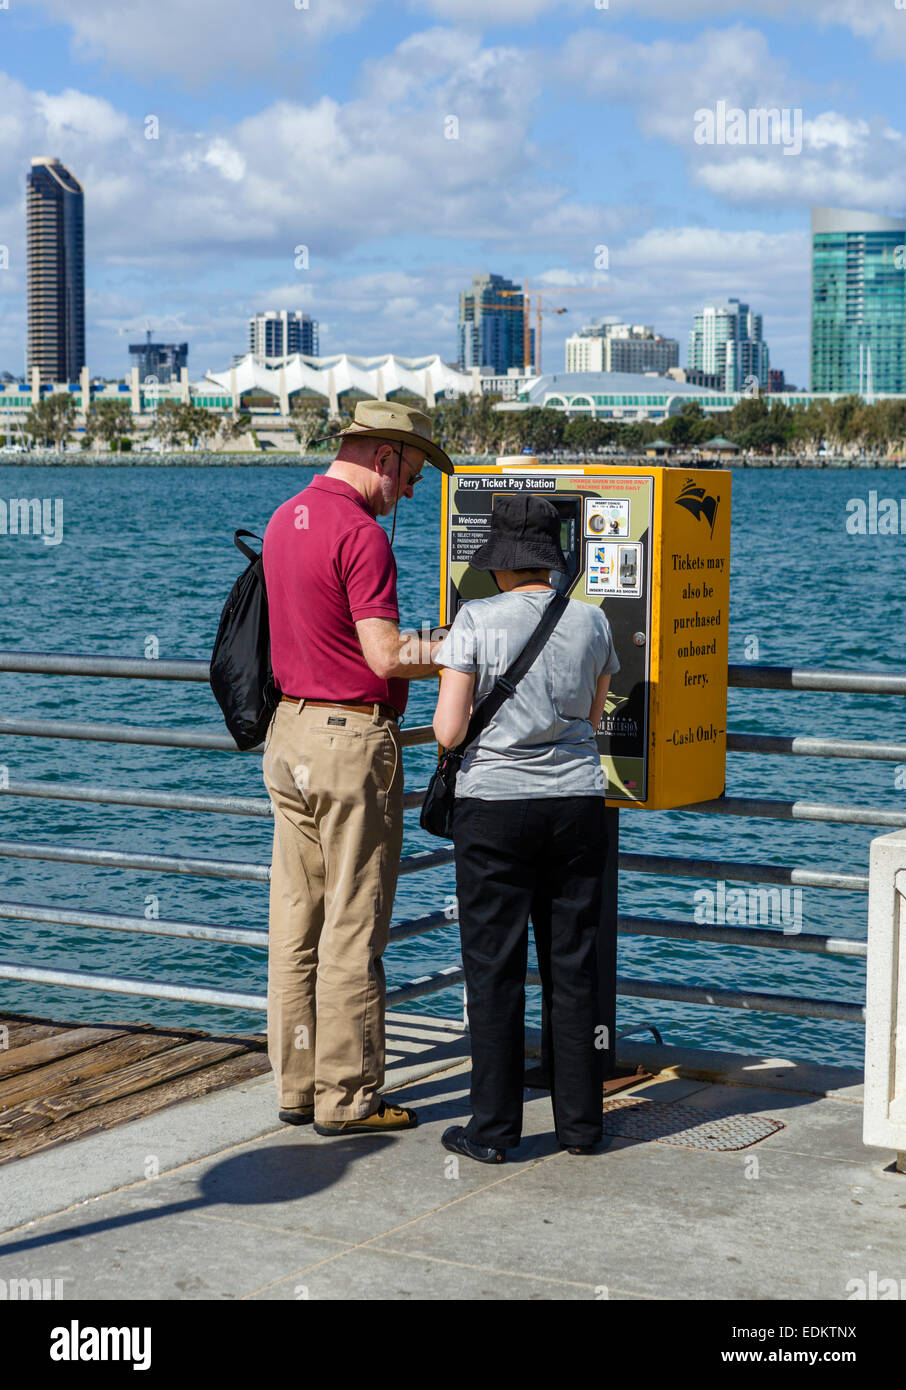 Couple buying ferry tickets from a pay station on the pier in Coronado, San Diego, California, USA Stock Photo